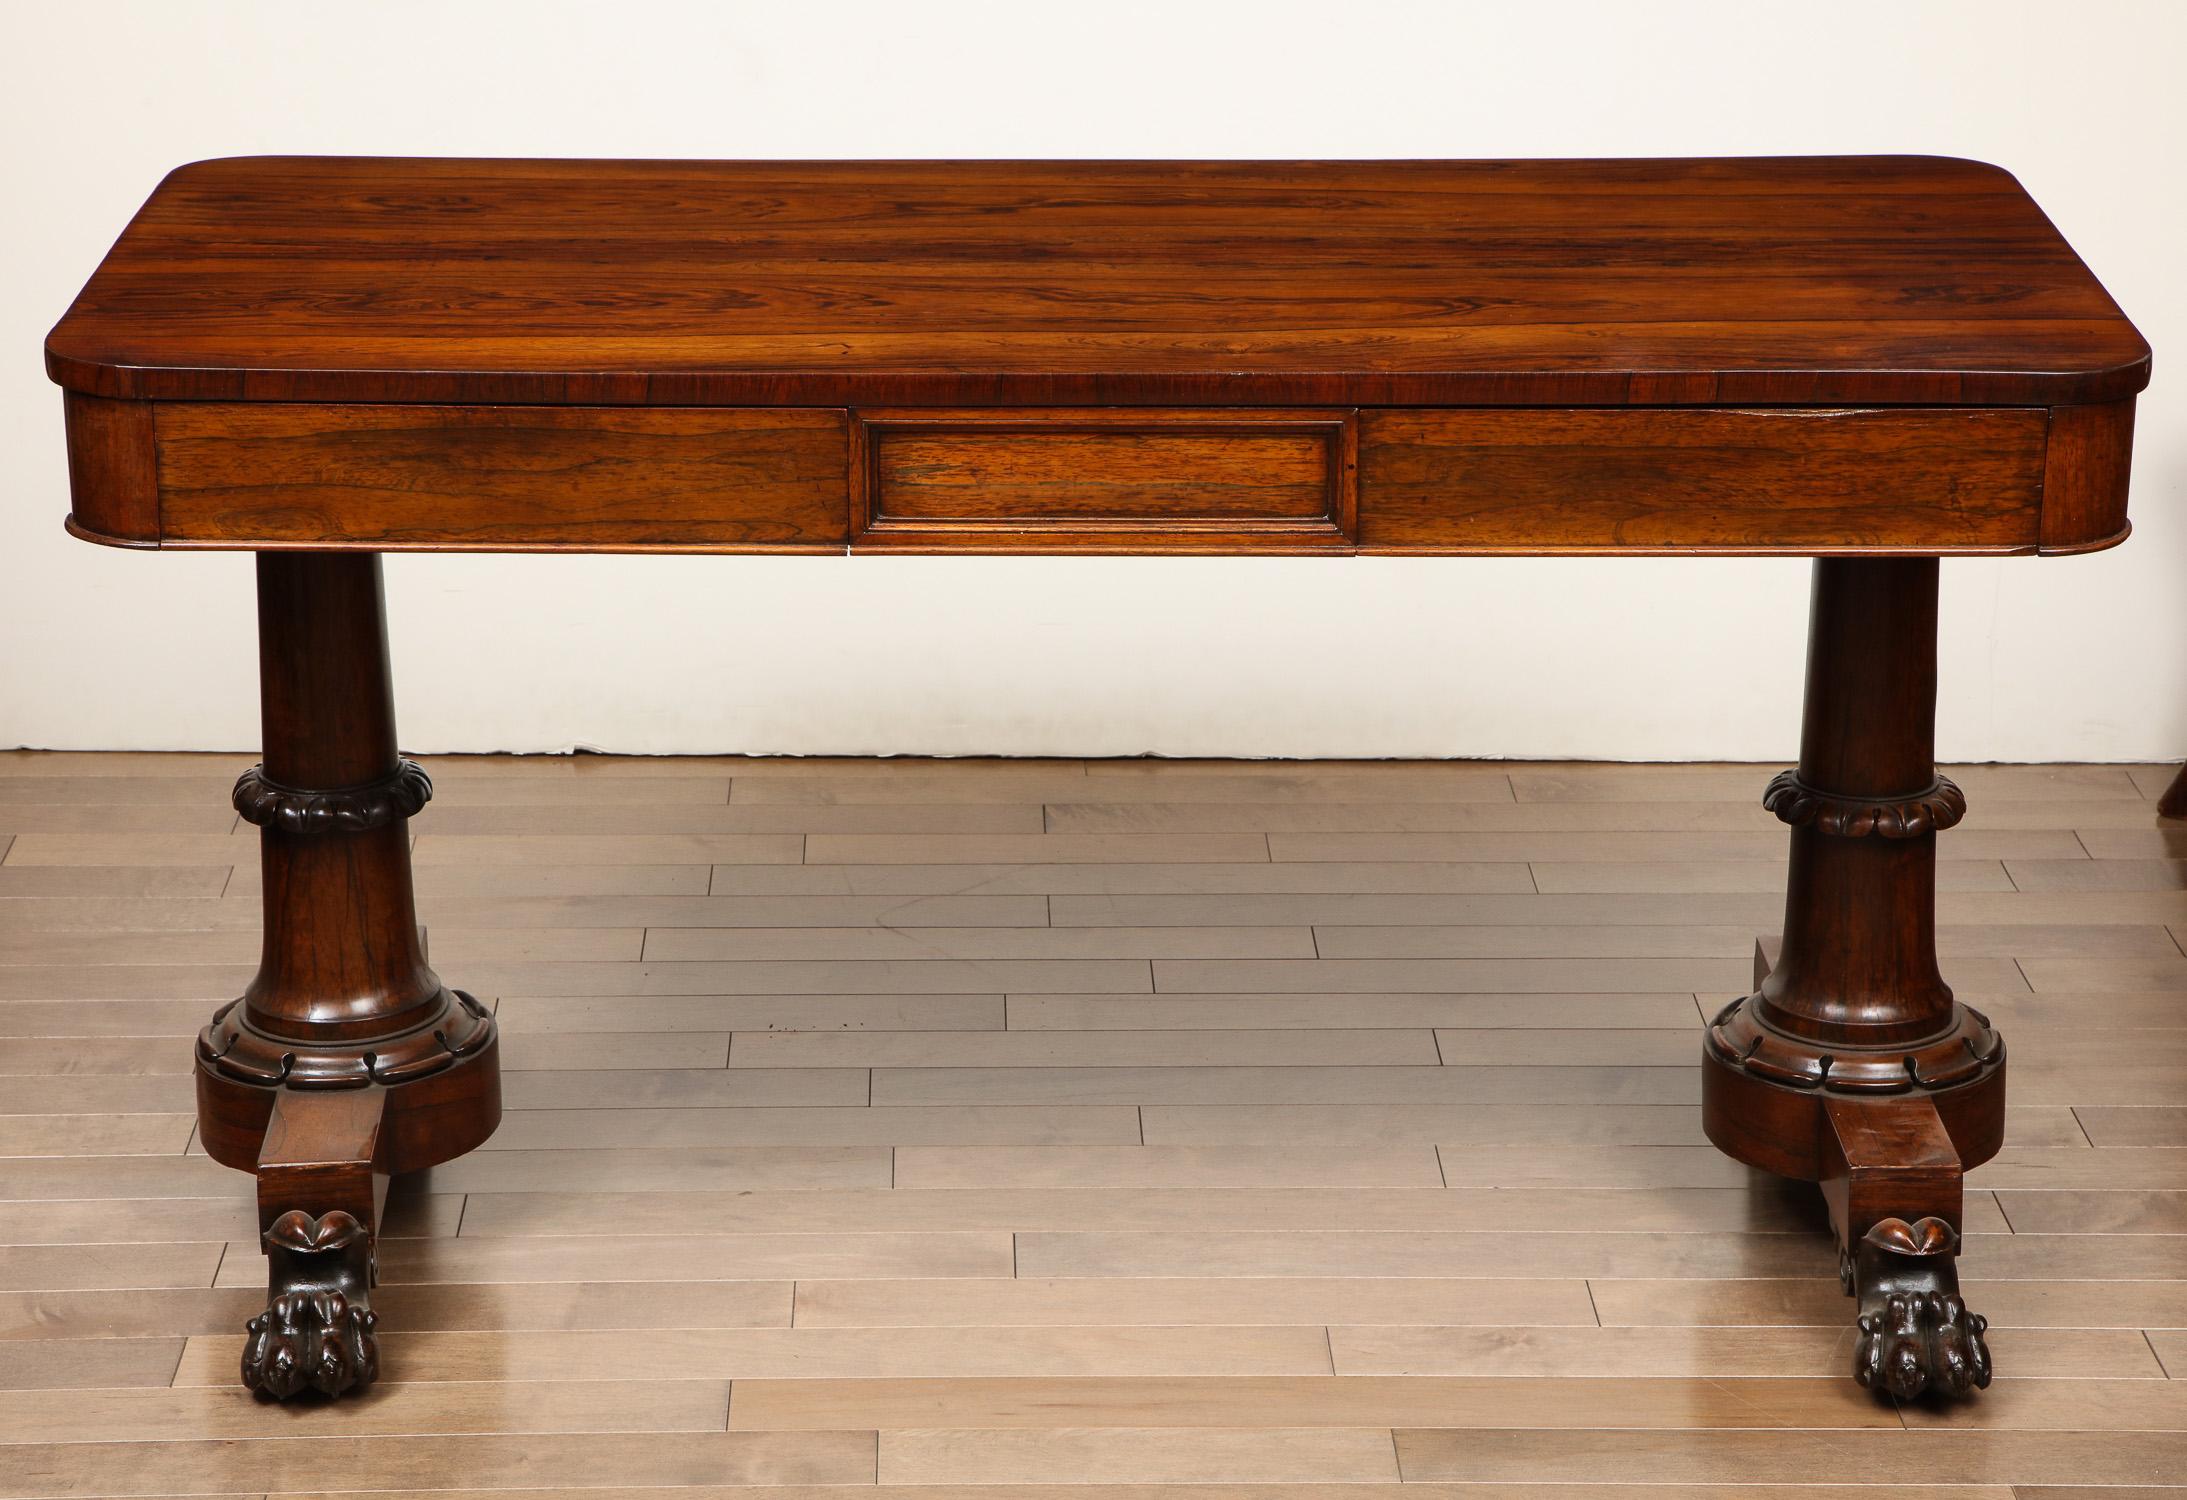 Early 19th century English library table with two drawers in Goncalo Alves.